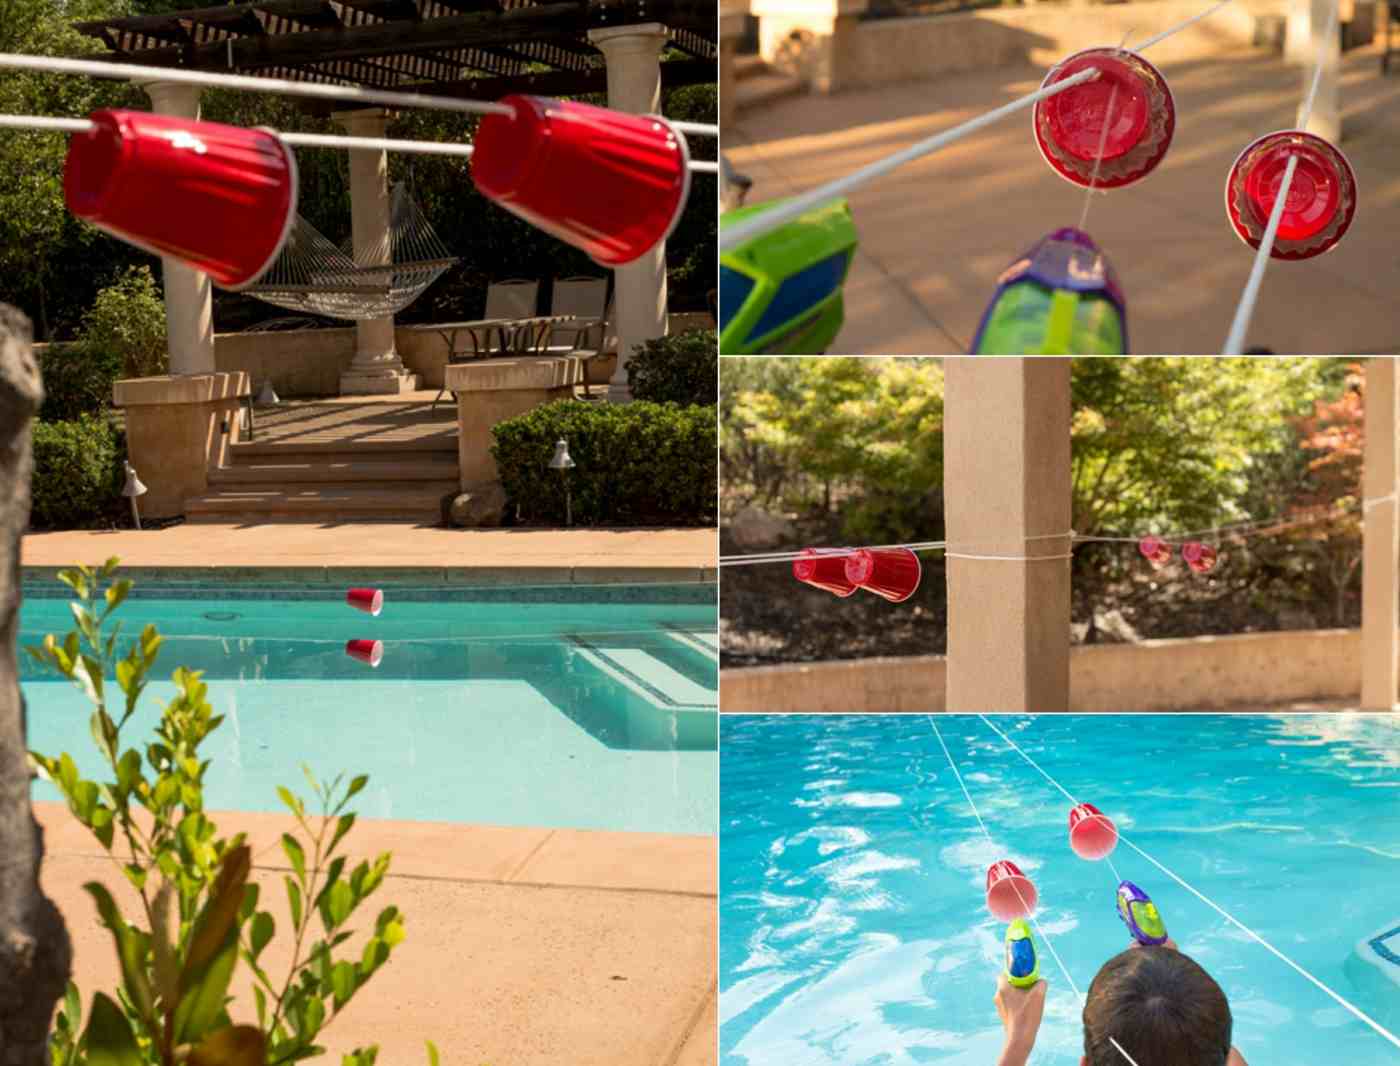 Pool Party for Childbirth with Matching Games Plans - Becher Shooting with Water Pistols